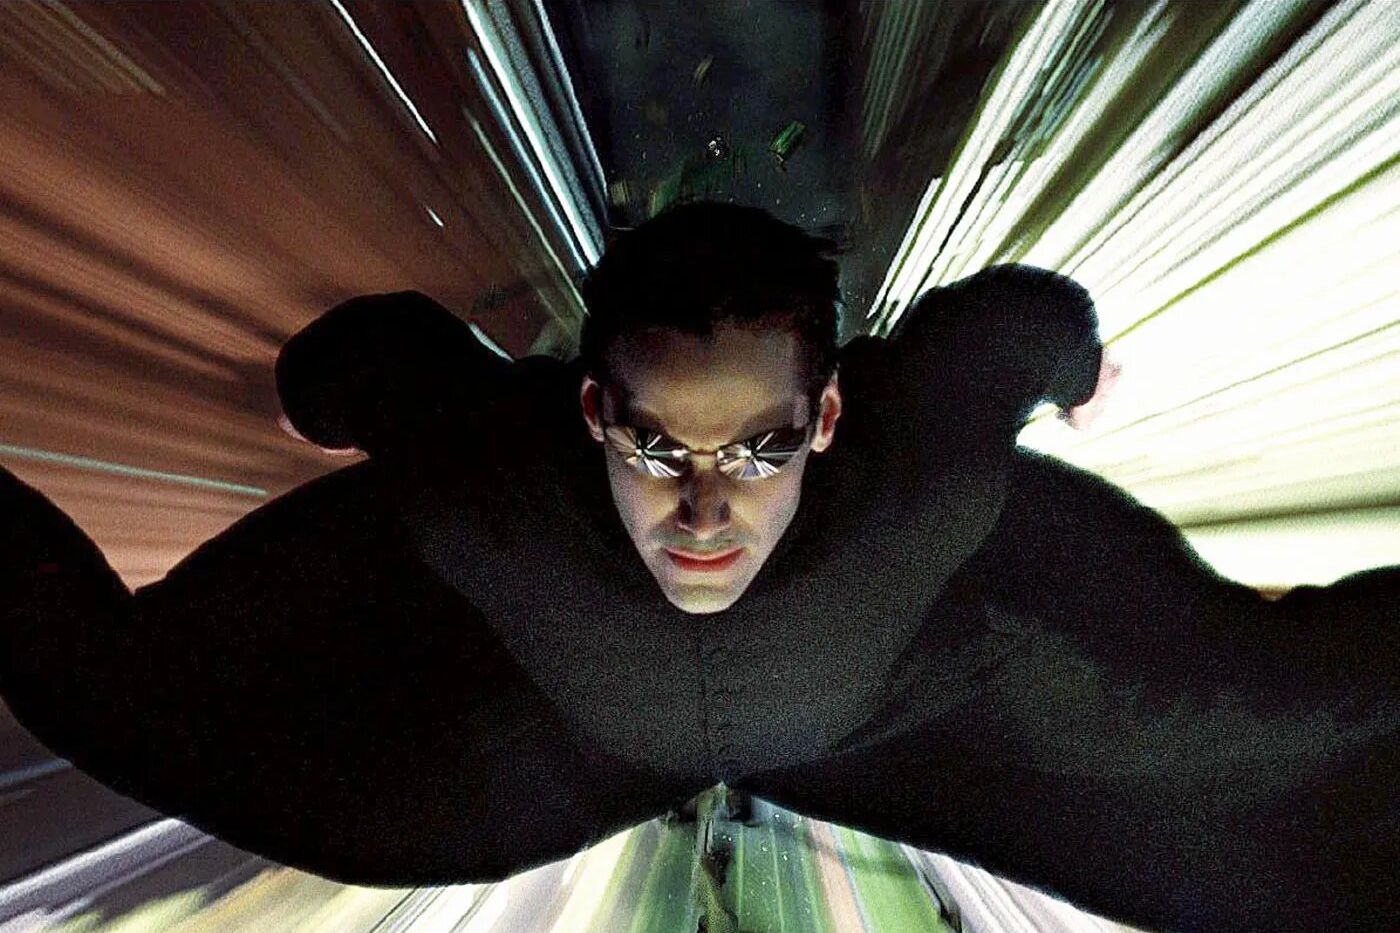 Keanu Reeves' The Matrix franchise will continue with another film